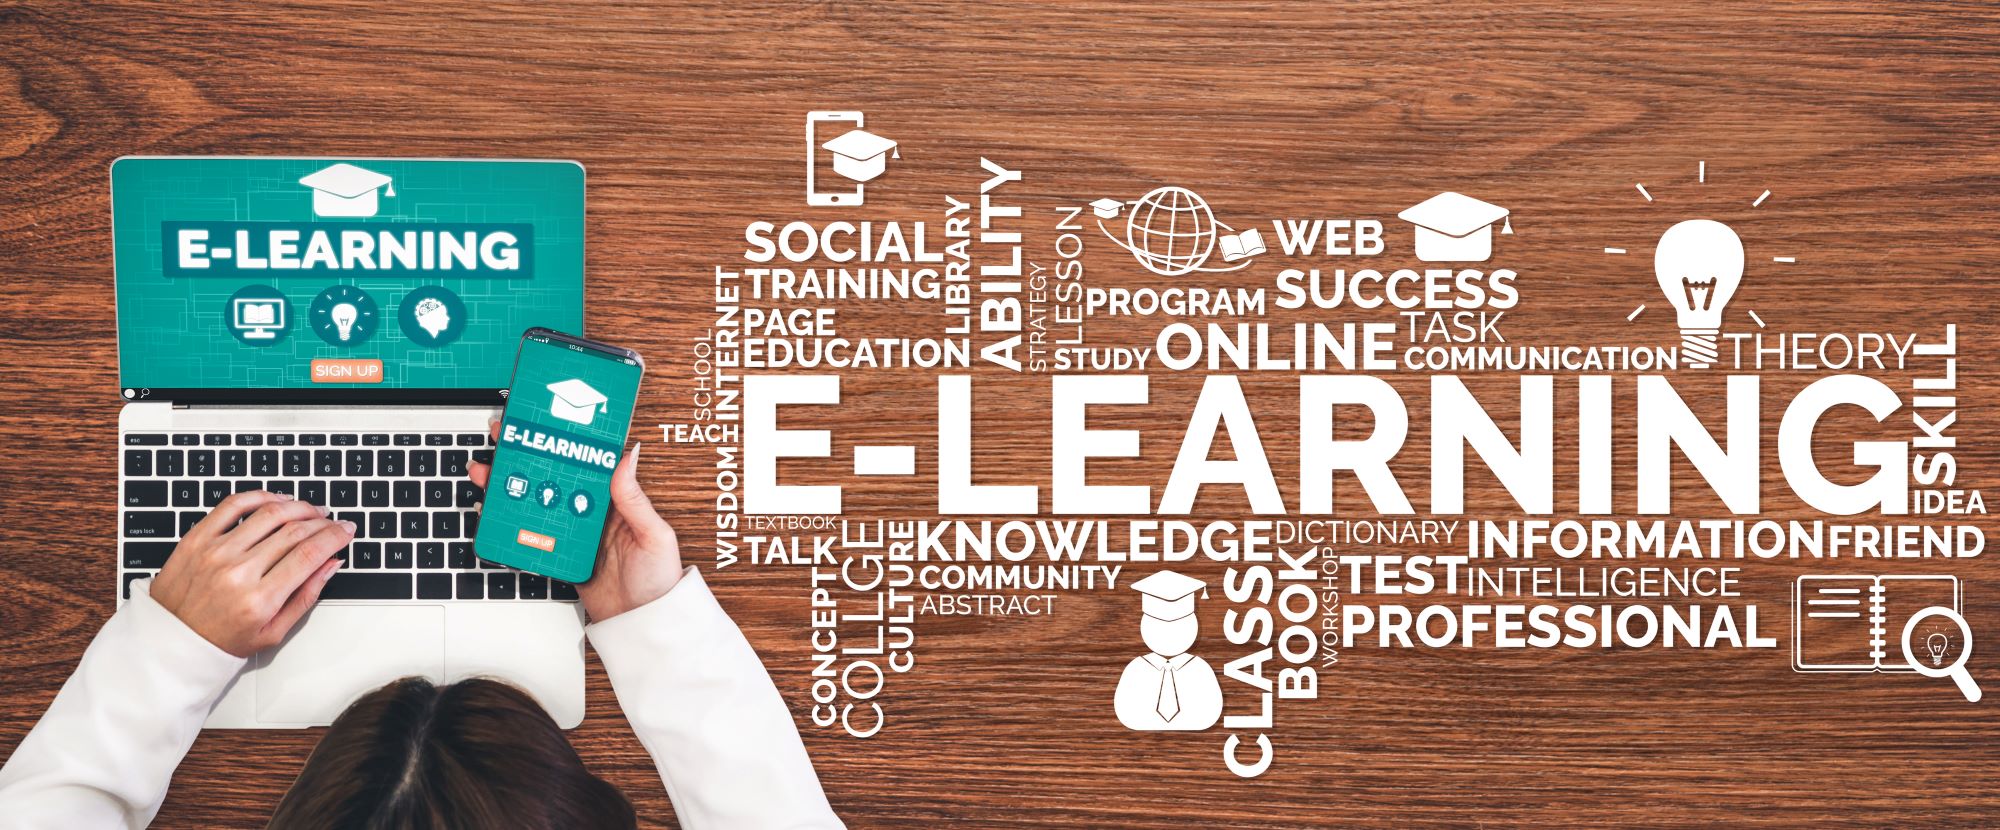 Elearning image with several words describing what elearning is